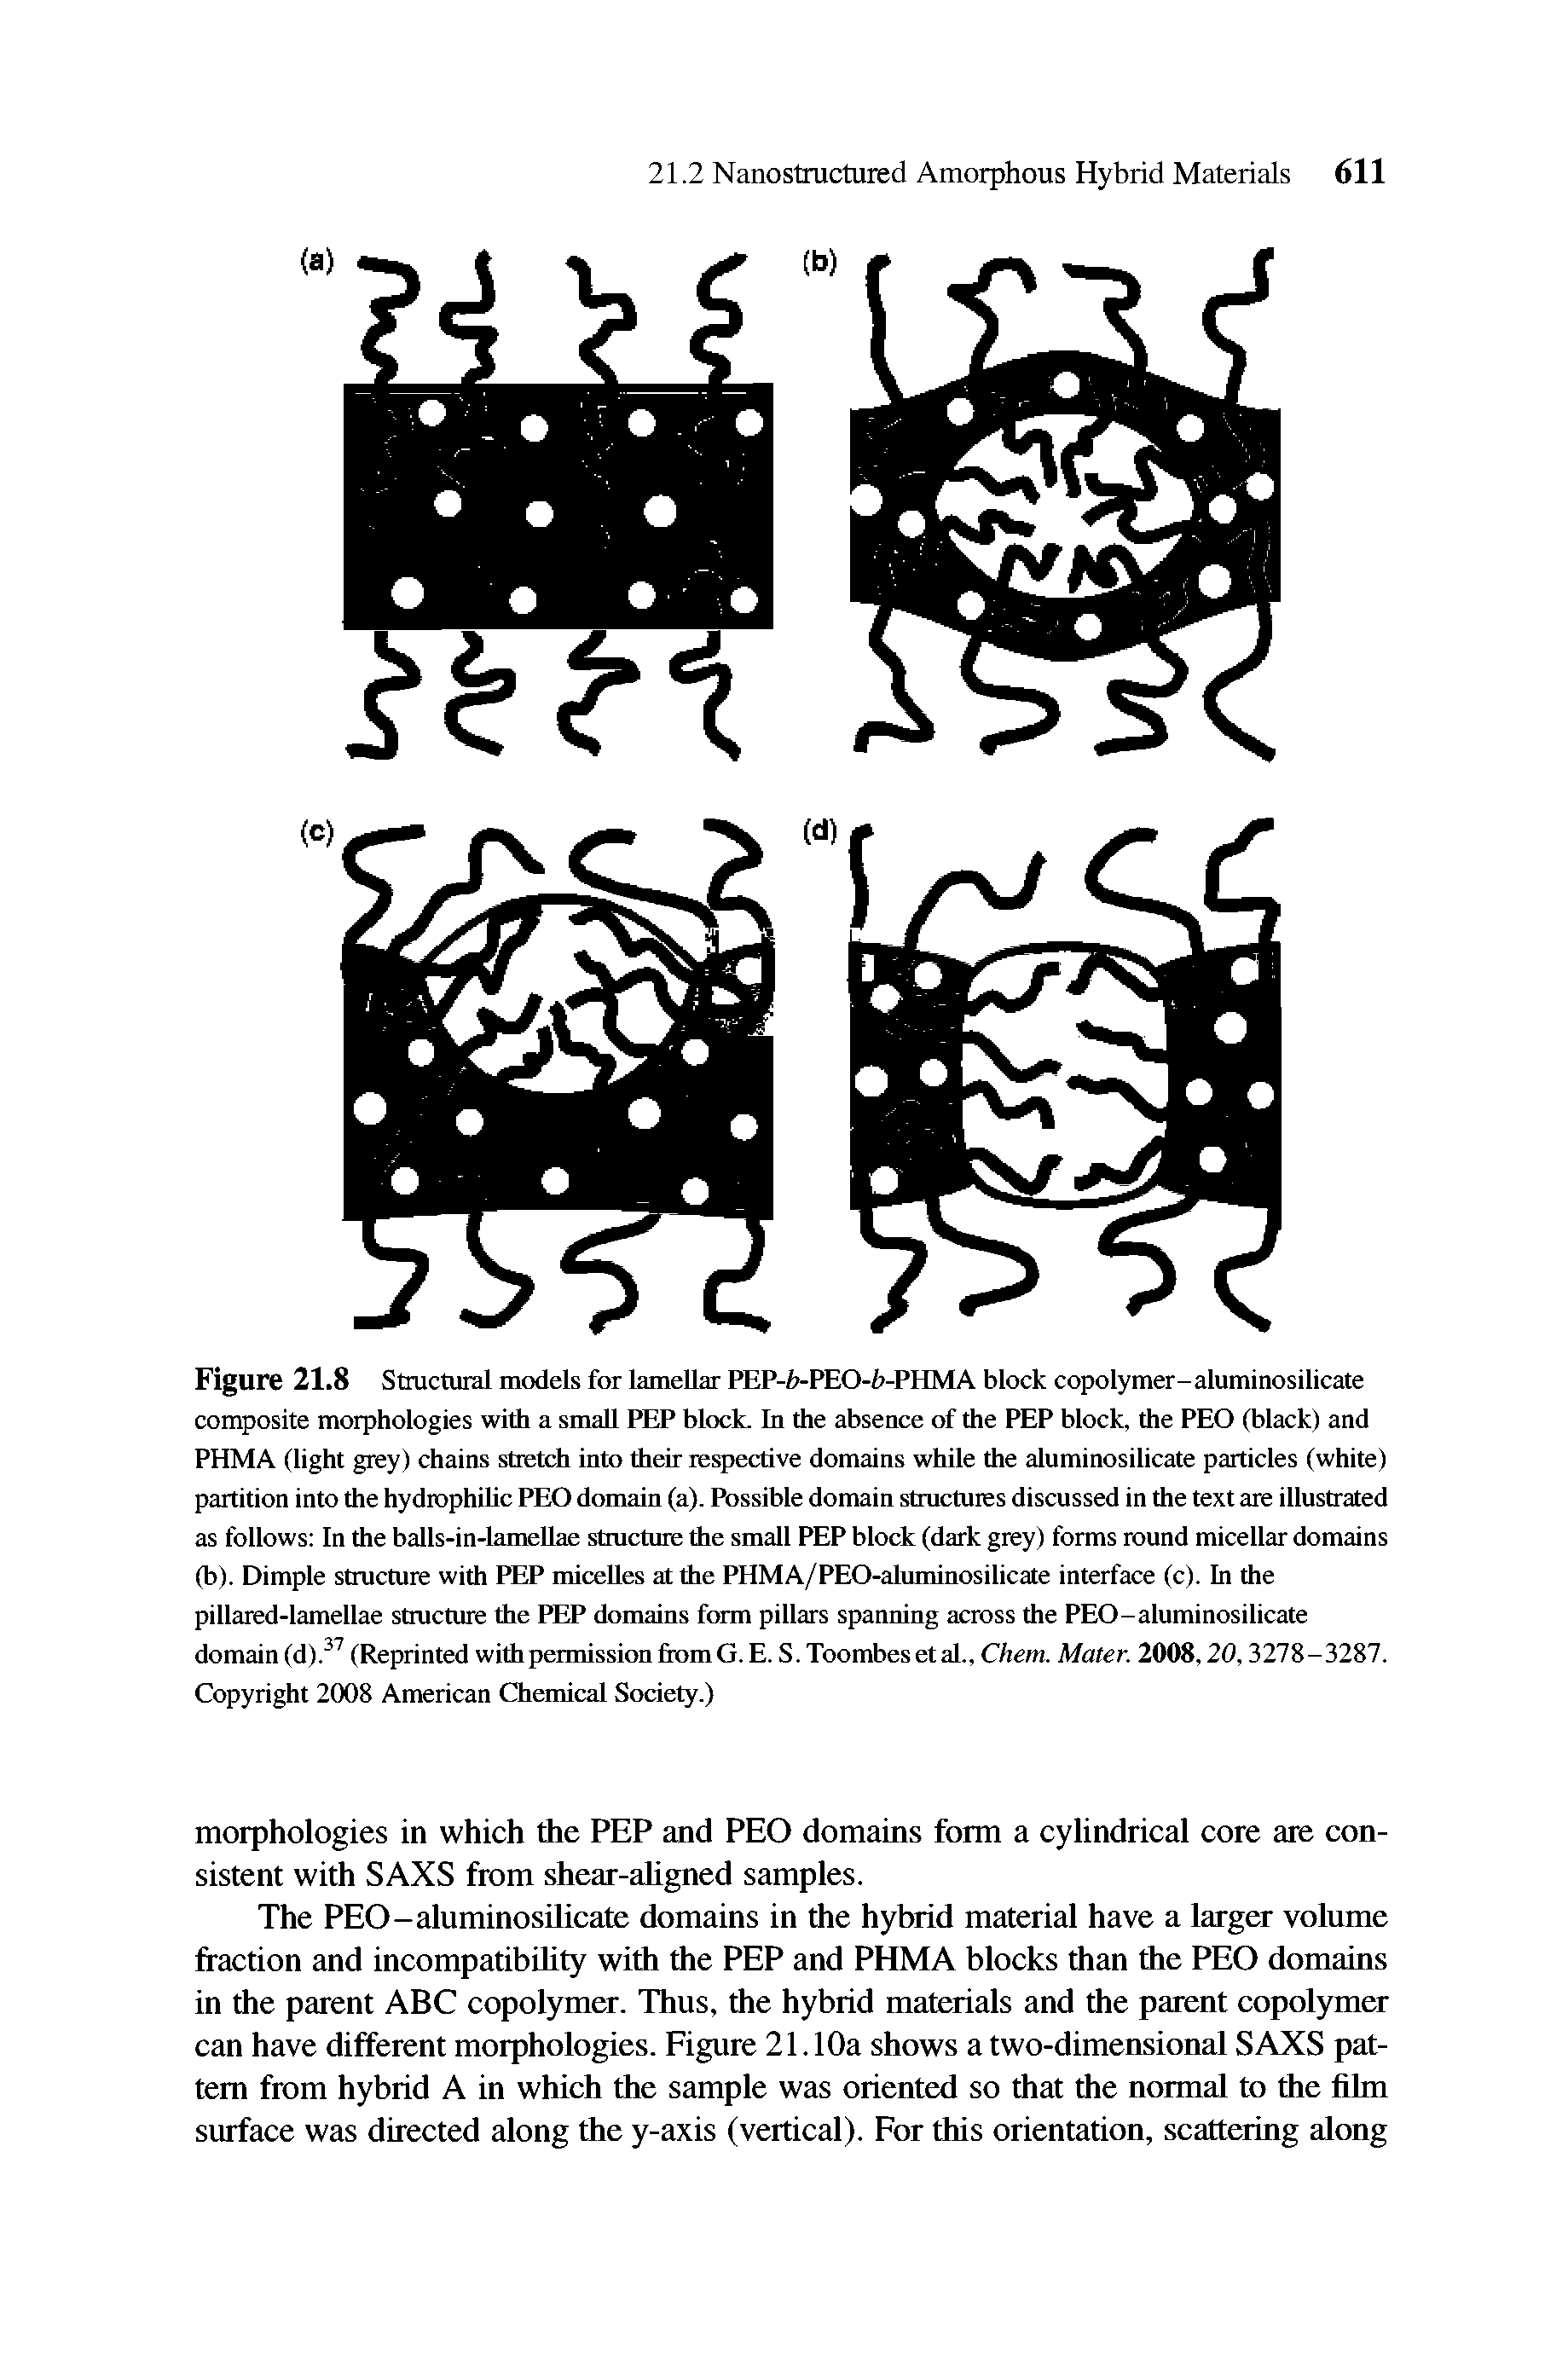 Figure 21.8 Structural models for lamellar PEP-fr-PEO-b-PHMA block copolymer-aluminosilicate composite morphologies with a small PEP block. In the absence of the PEP block, the PEO (black) and PHMA (light grey) chains stretch into their respective domains while the aluminosilicate particles (white) partition into the hydrophilic PEO domain (a). Possible domain structures discussed in the text are illustrated as follows In the balls-in-lamellae structure the small PEP block (dark grey) forms round micellar domains (b). Dimple structure with PEP micelles at the PHMA/PEO-aluminosilicate interface (c). In the pillared-lamellae structure the PEP domains form pillars spanning across the PEO-aluminosilicate domain (d).37 (Reprinted with permission fiomG.E. S.Toombesetal., Chem. Mater. 2008,20,3278-3287. Copyright 2008 American Chemical Society.)...